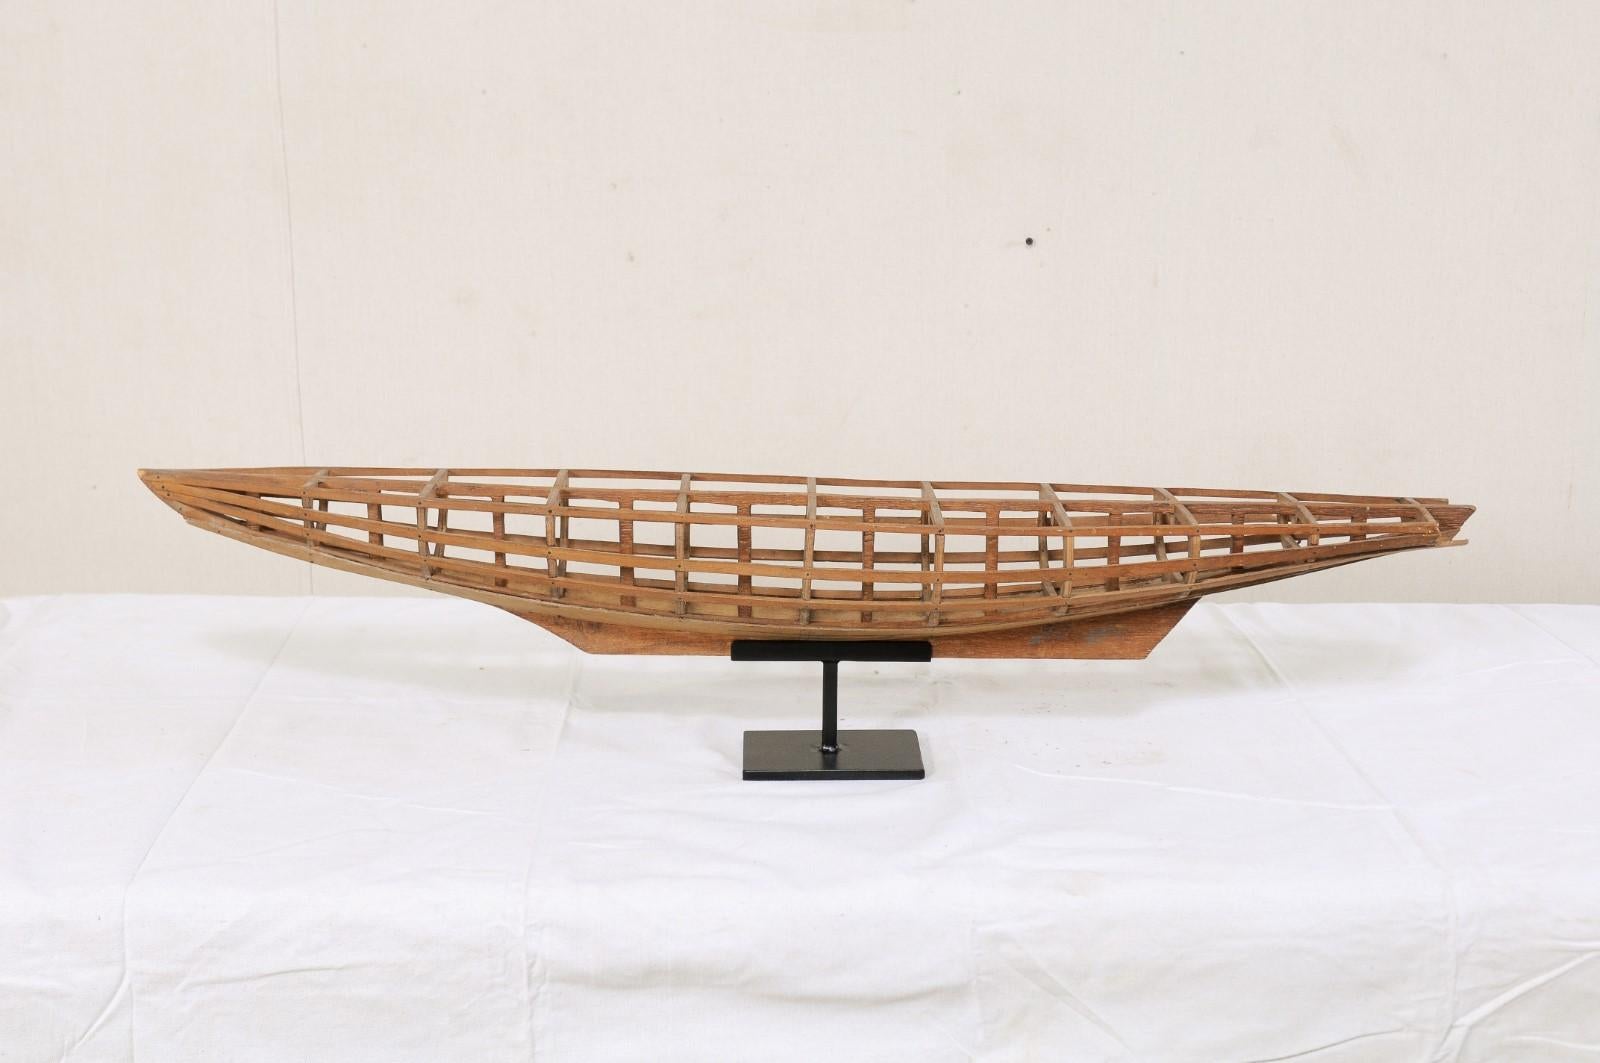 A French wooden boat model from the late 19th-early 20th century on custom stand. This antique boat model from France consists of a wooden open carcass of beams and ribs, just over 3.5 feet in length, which is nicely displayed and raised upon a